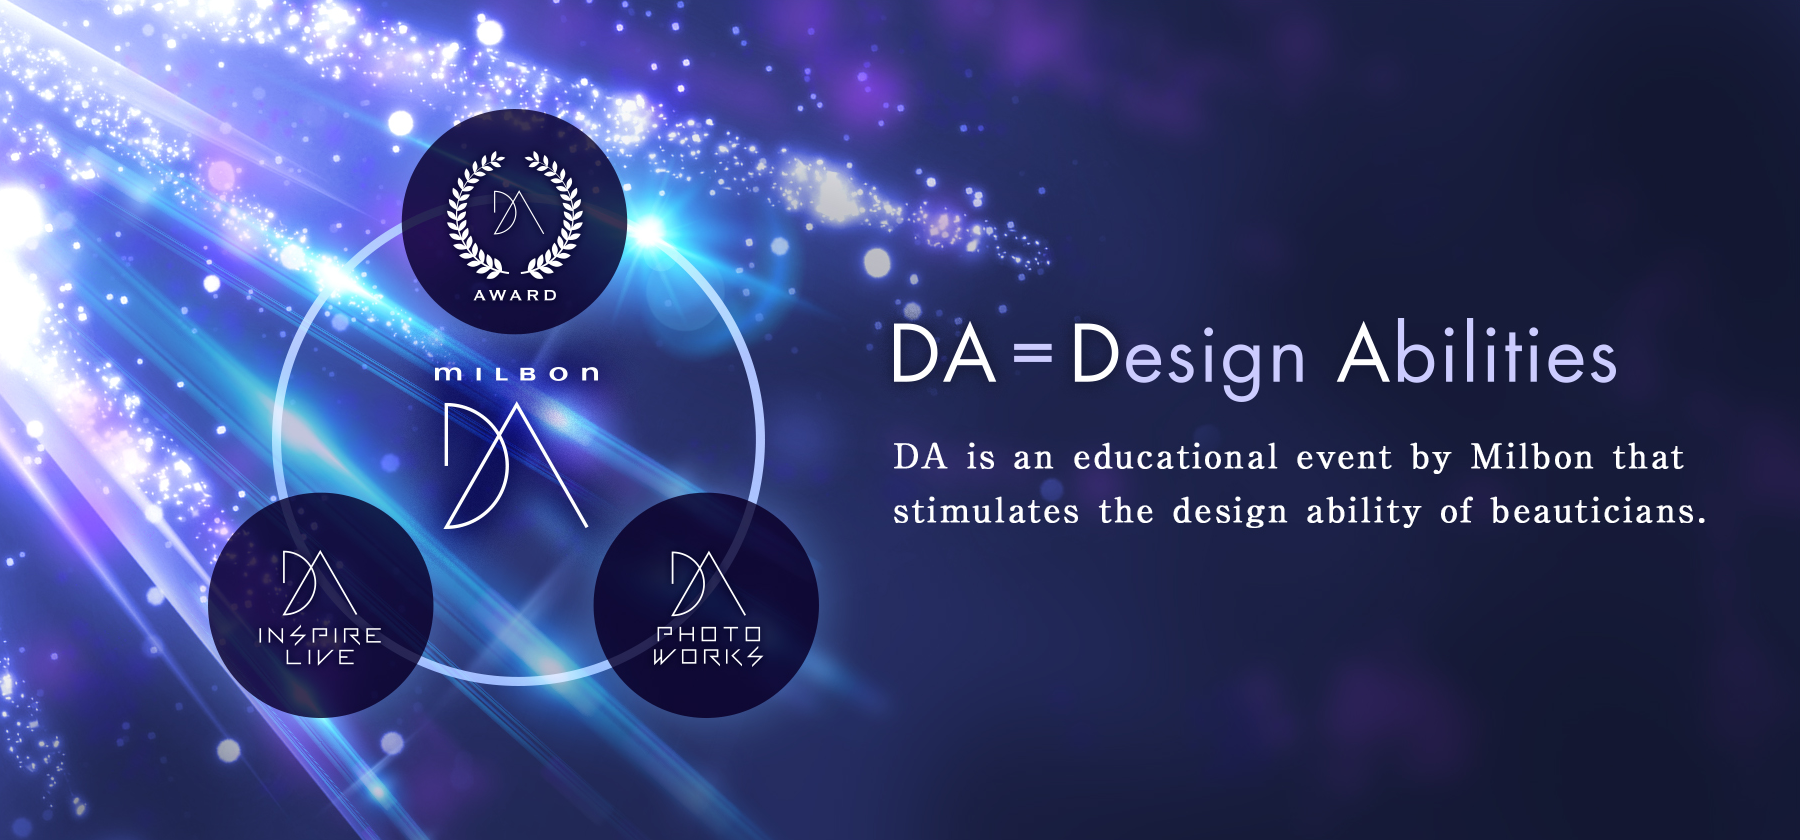 DA is an educational event by Milbon that stimulates the design ability of beauticians.